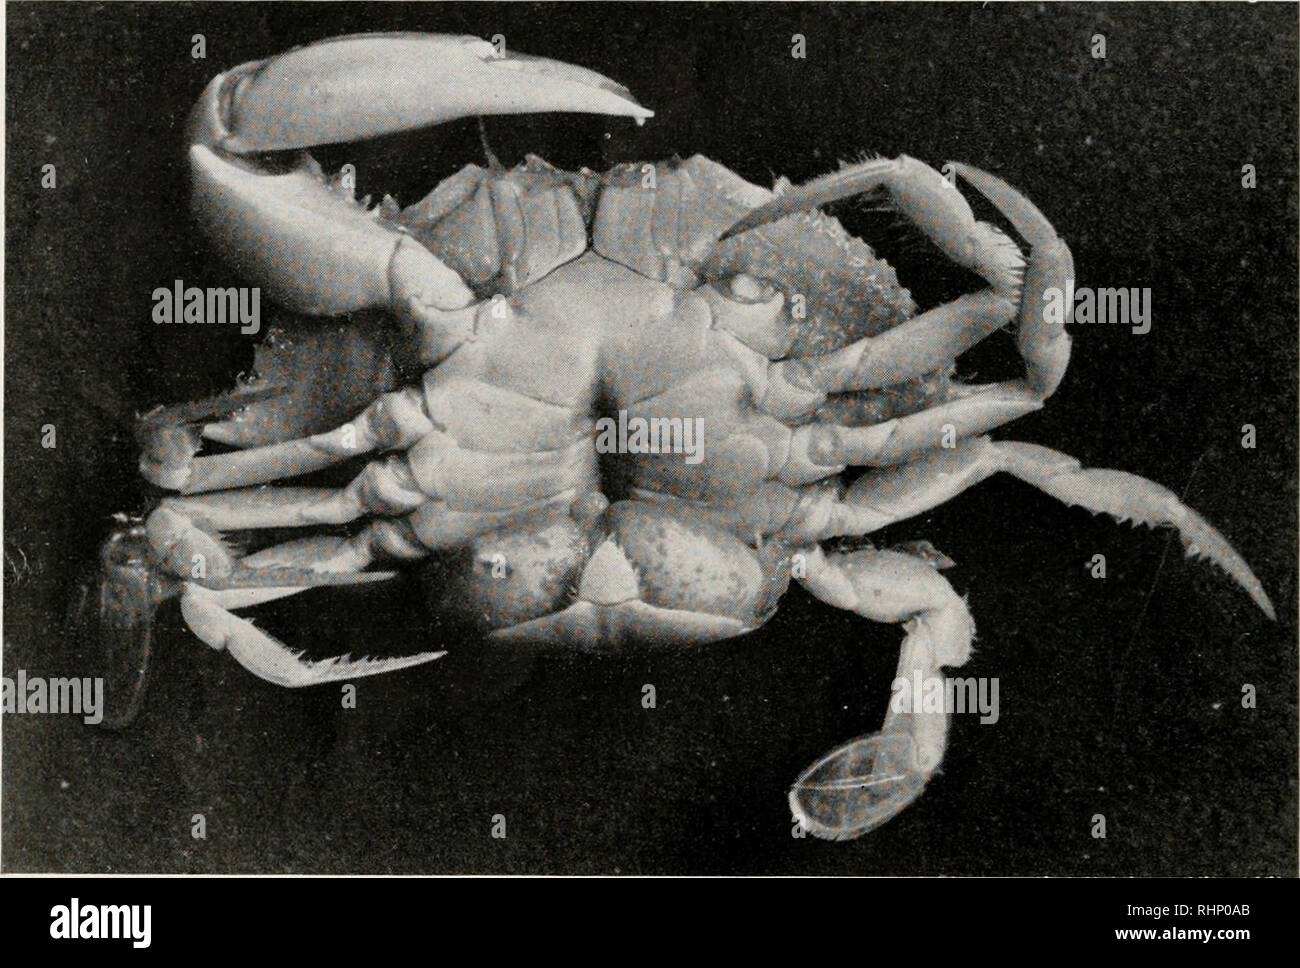 . The Biological bulletin. Biology; Zoology; Biology; Marine Biology. 278 EDWARD G. REINHARD MATERIALS EXAMINED Thirty parasitized crabs of the species C. sapidns were used in this study, with both sexes almost equally represented. The parasite is found attached to the underside of the abdomen of the host (Fig. 1), with the stalk of attachment fastened to the midline of the fourth or fifth abdominal segment, rarely on the third. As a rule, one parasite occurs on a single host, but instances of multiple infestation are not uncommon. Of 30 infested Callinectes, 18 bore one parasite, 7 had 2 para Stock Photo